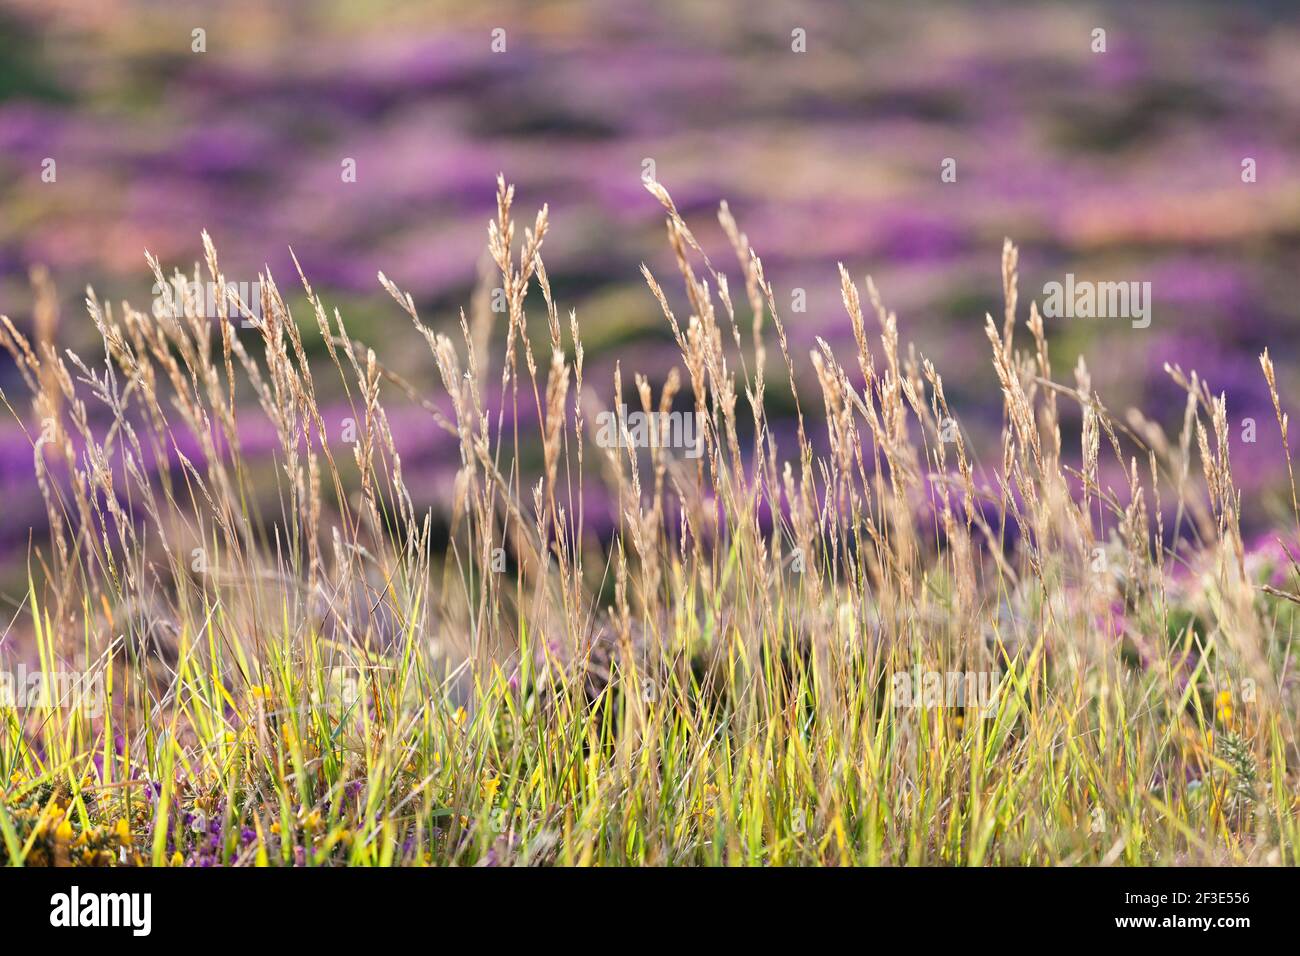 Grass and flowering heathland in the warm evening light on the Cap Frehel high plateau, Brittany, France. Stock Photo